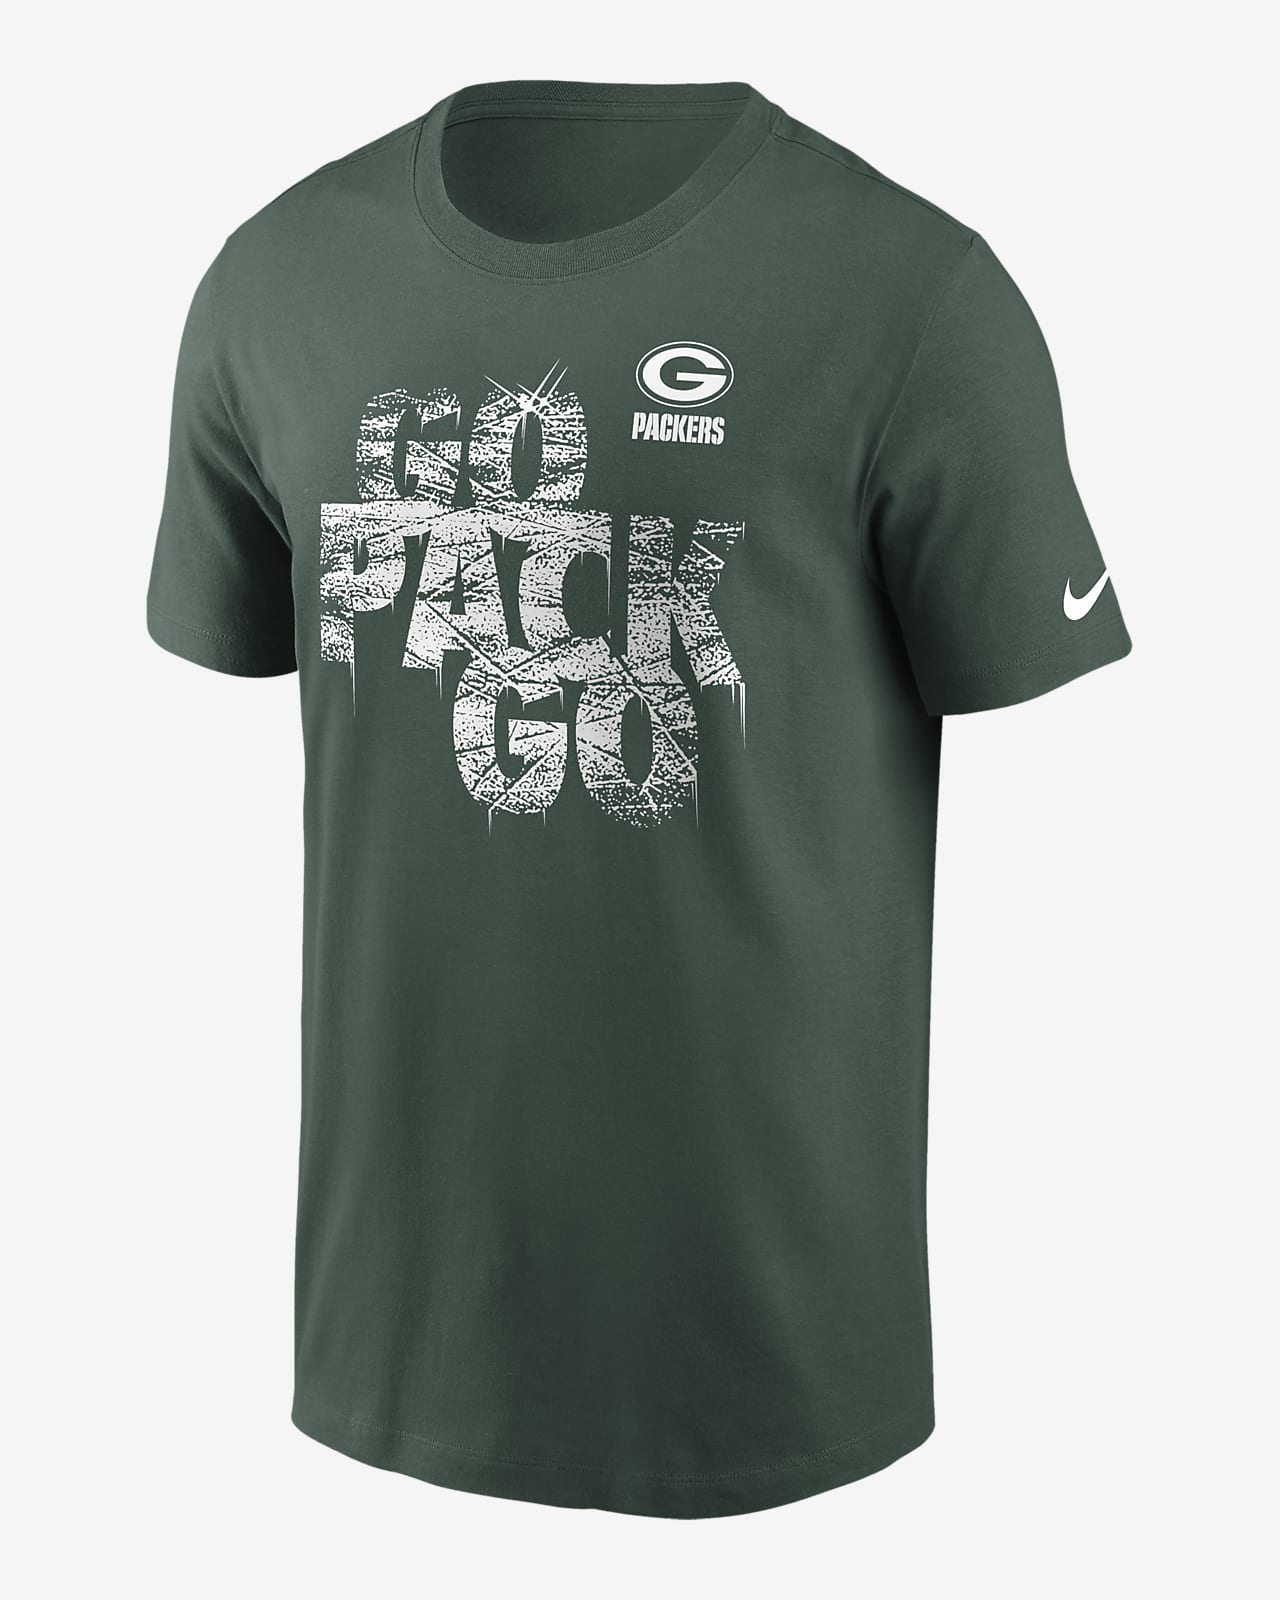 Green Bay Packers Local Essential Men's Nike NFL T-Shirt